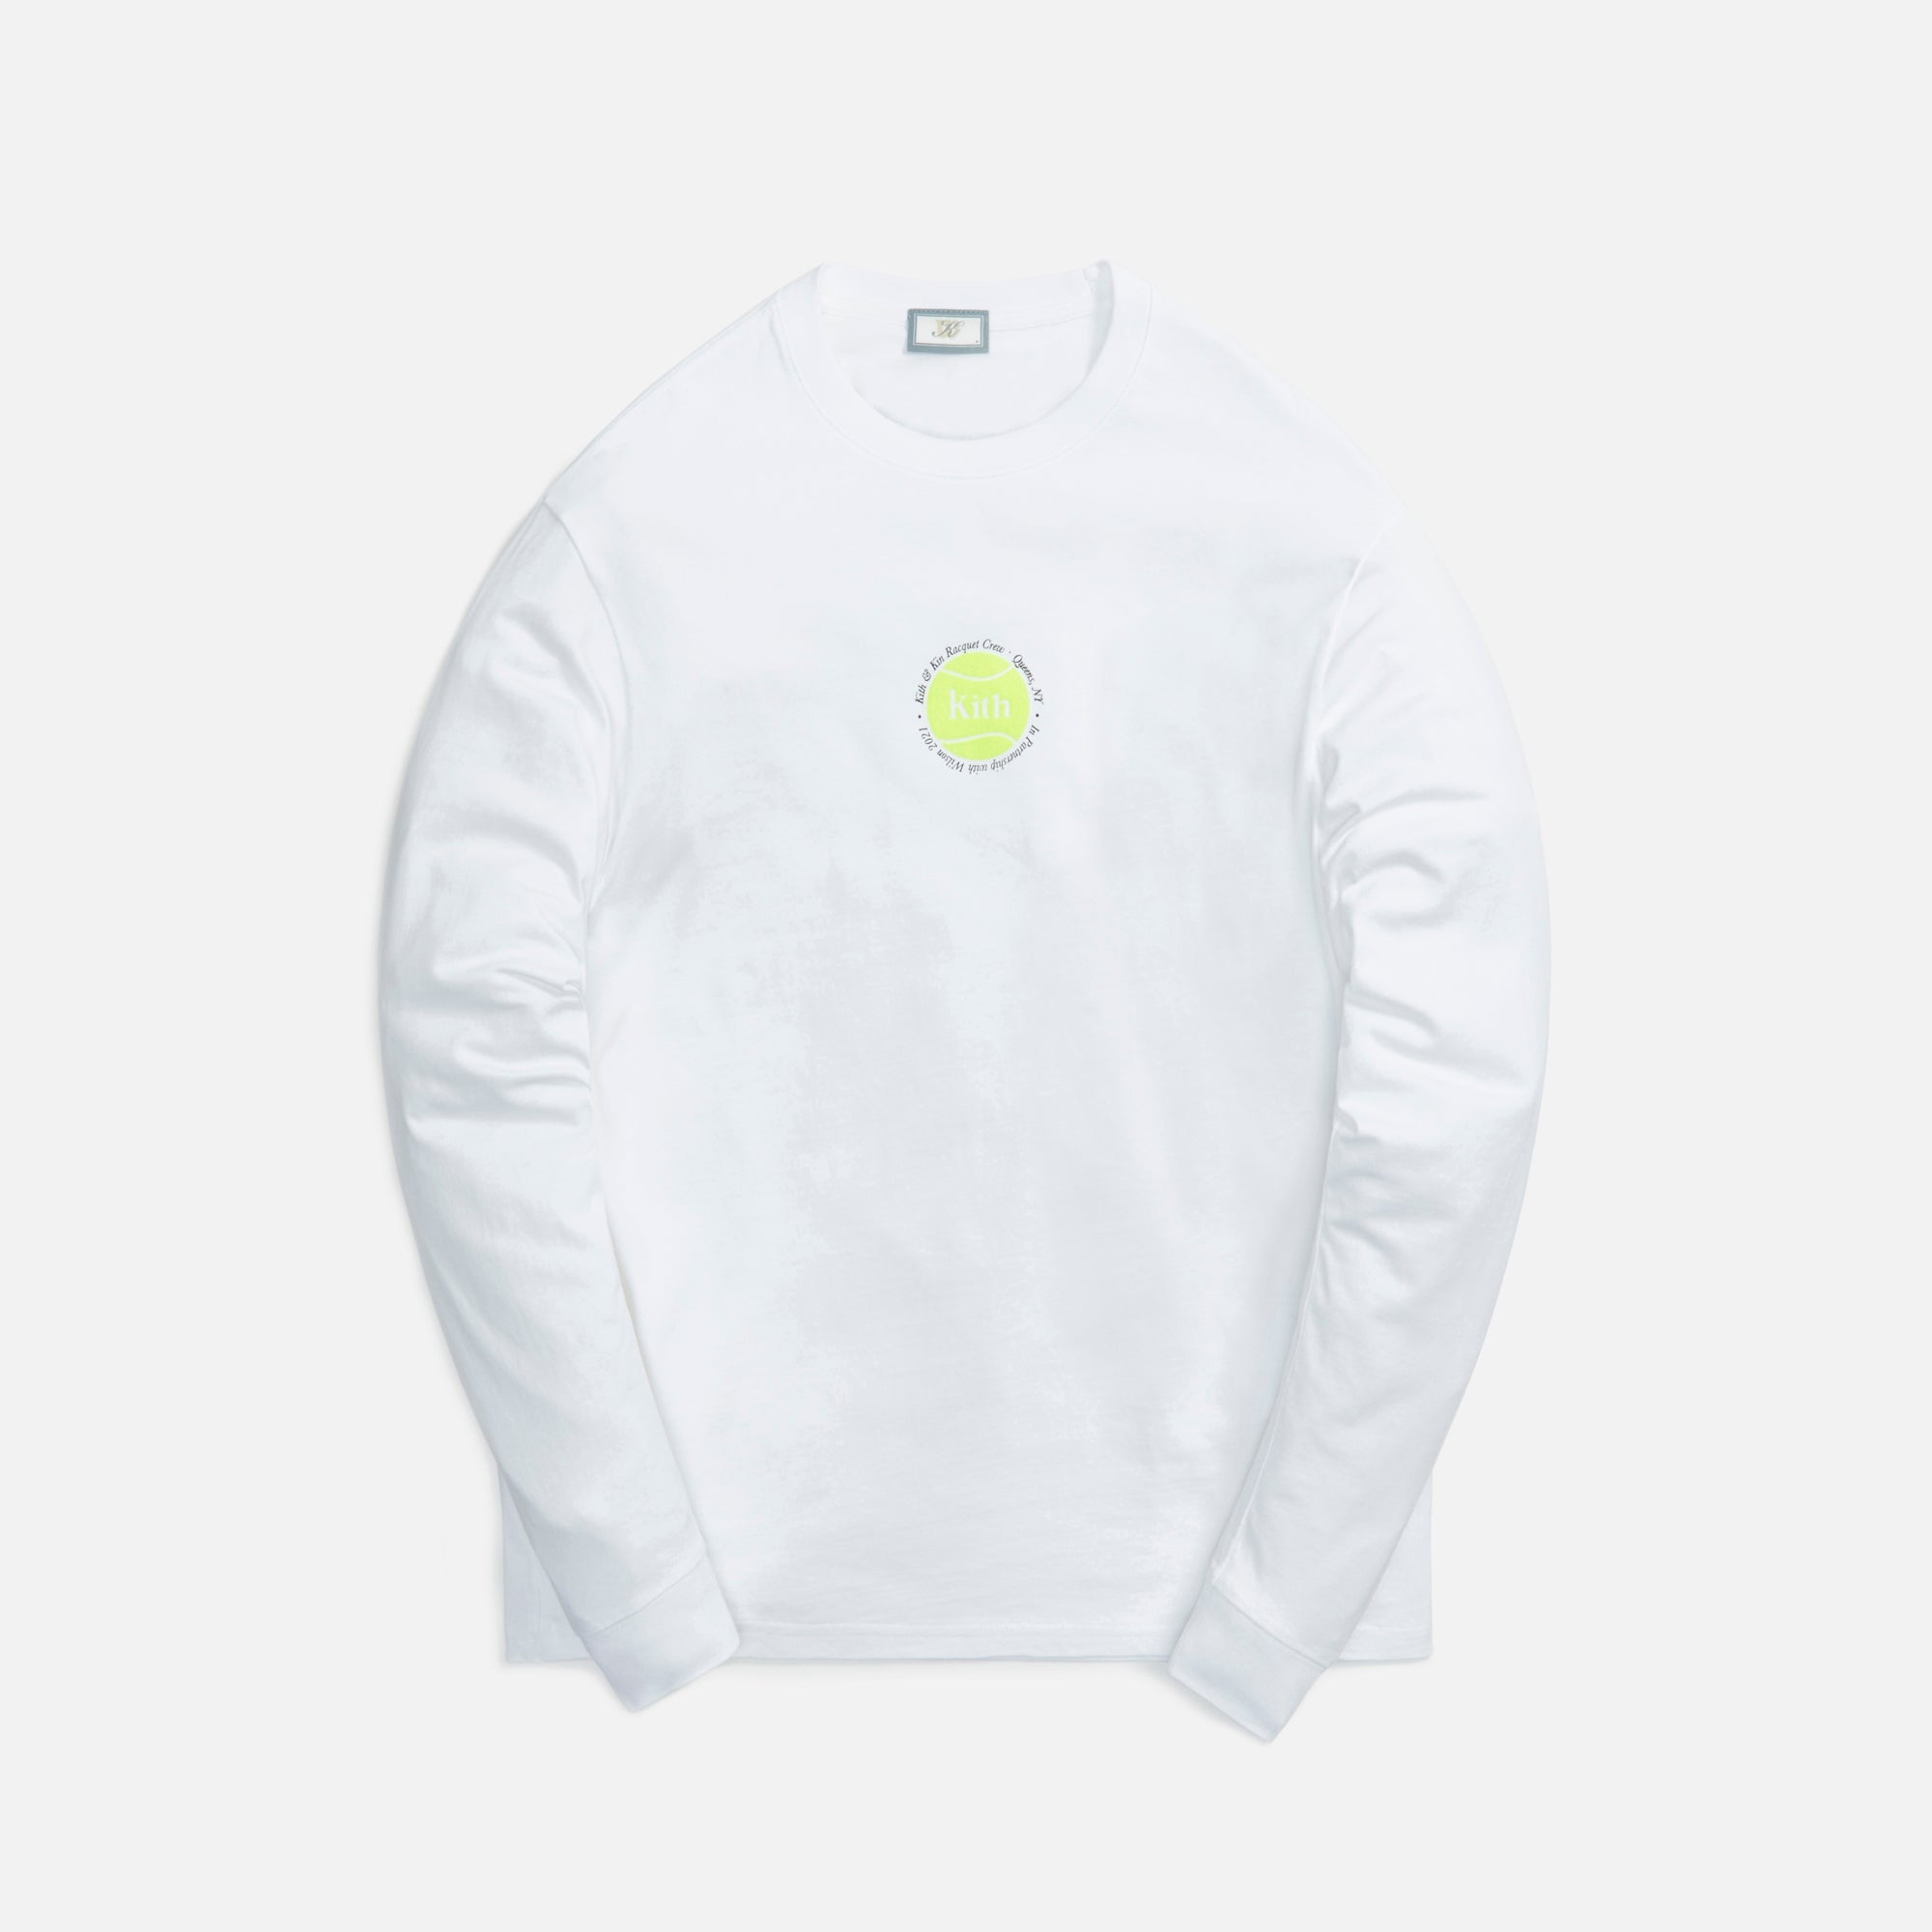 Sale > white kith shirt > in stock